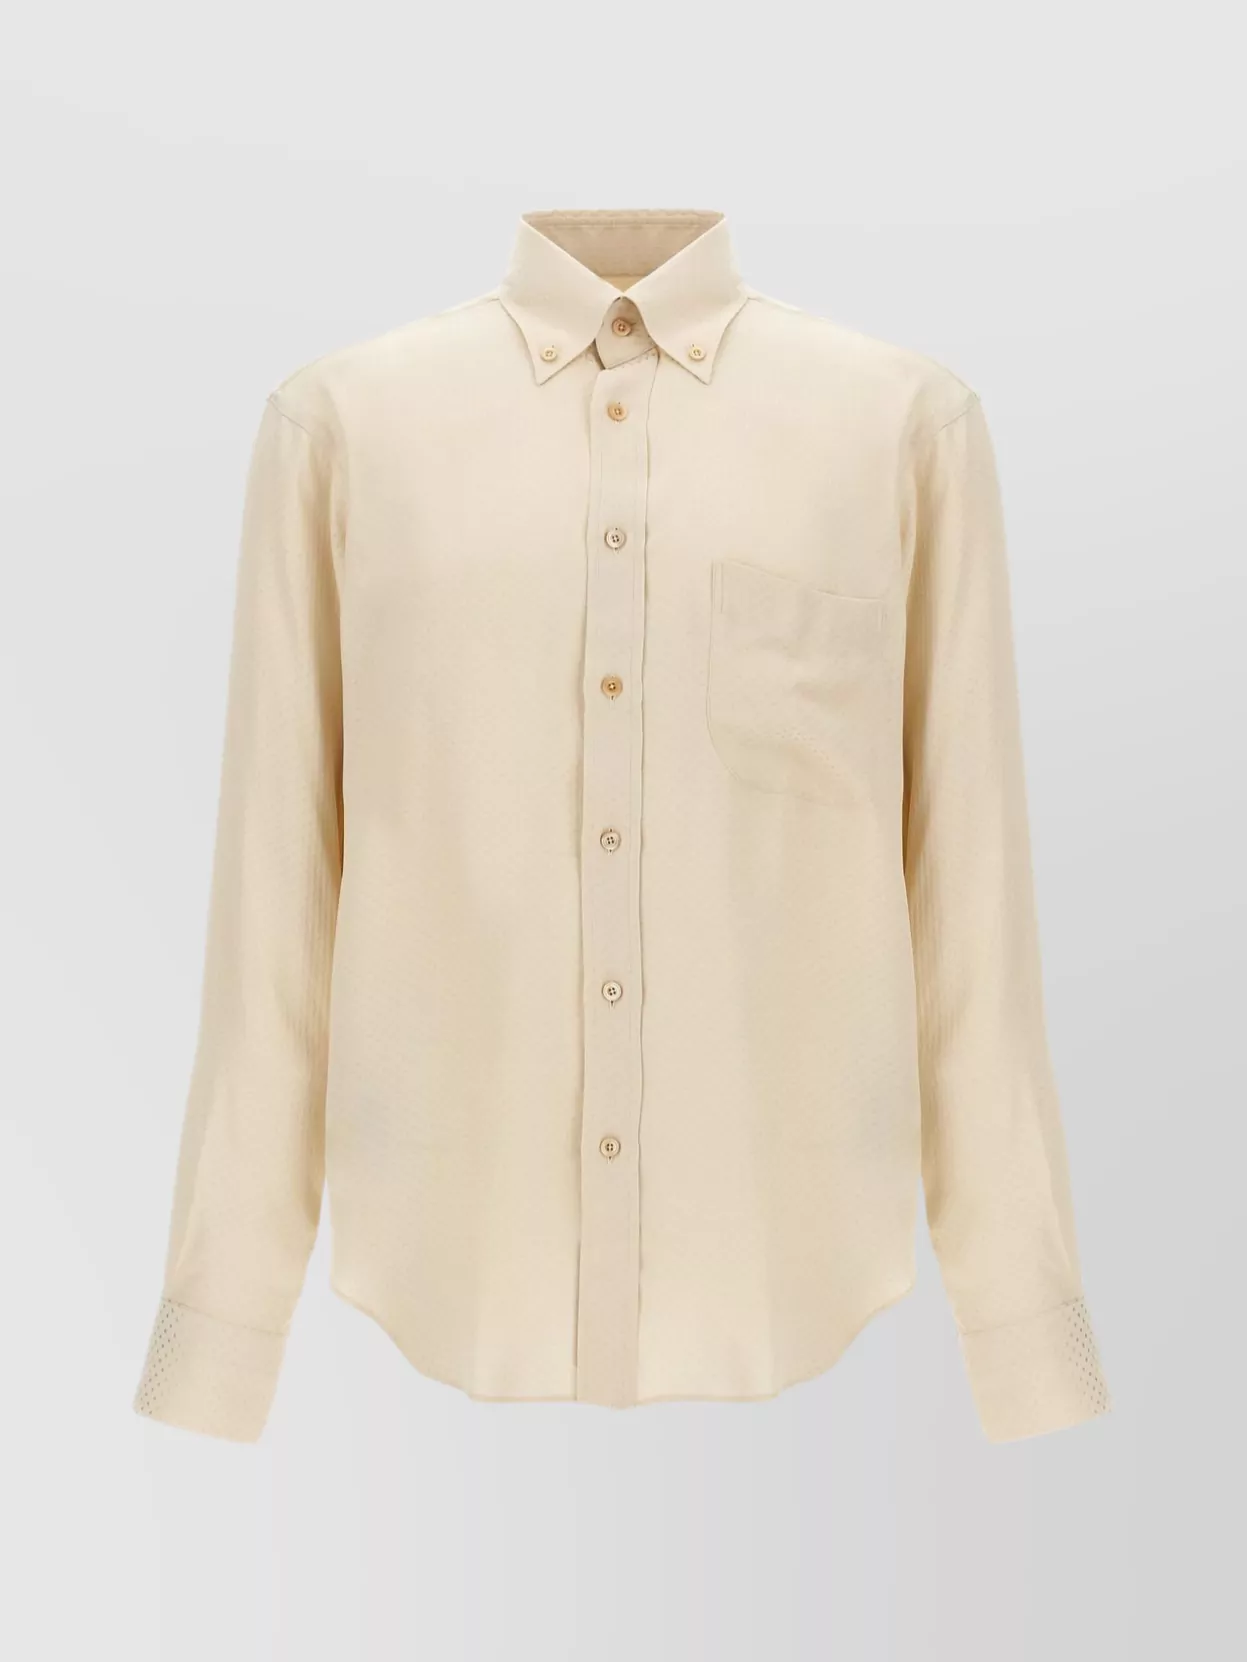 Tom Ford Dotted Shirt With Collar And Pocket In Neutral